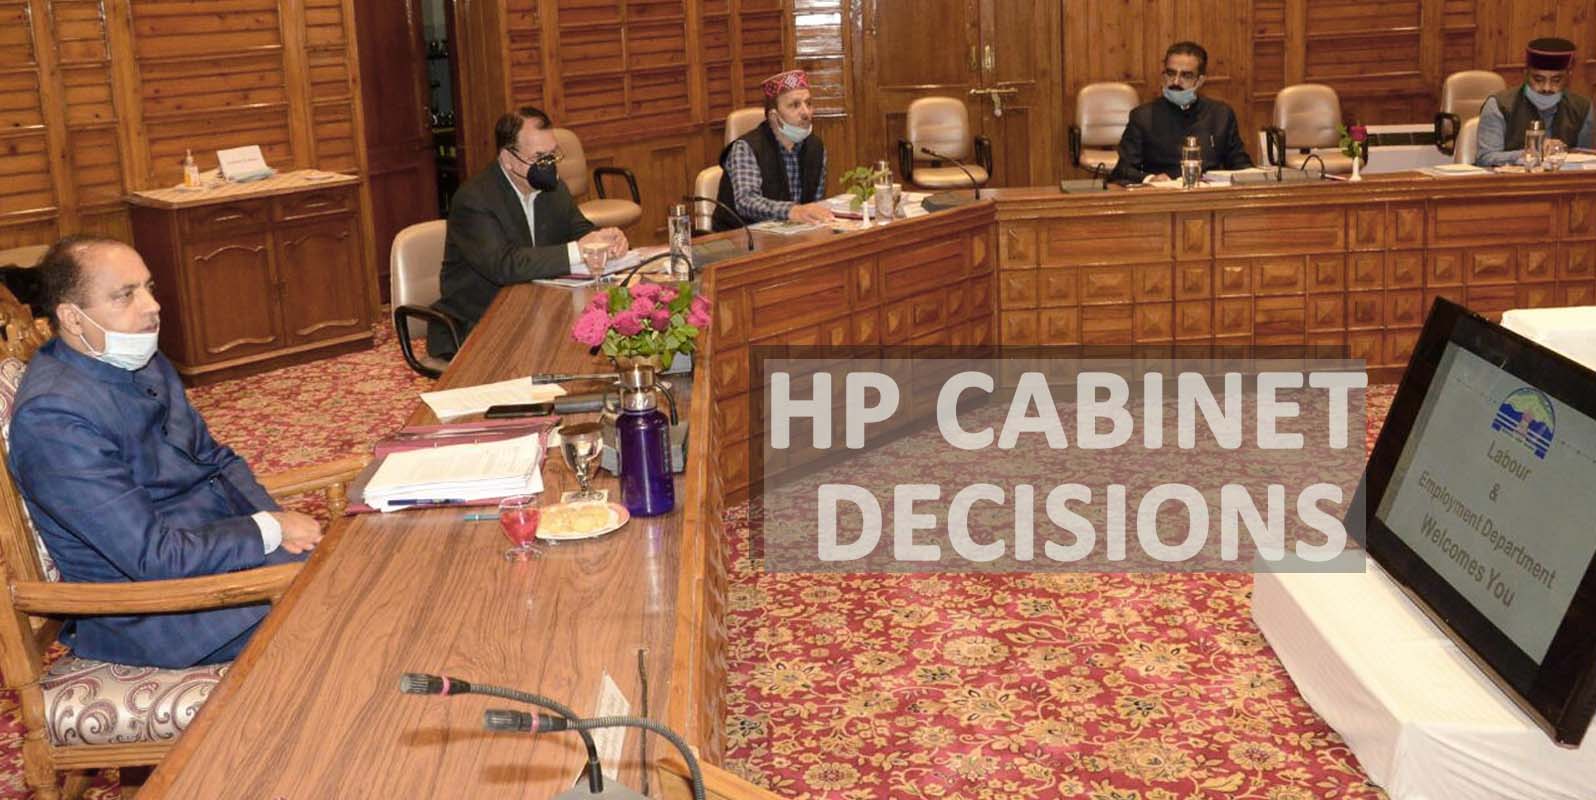 HP Cabinet Decisions may 13, 2020